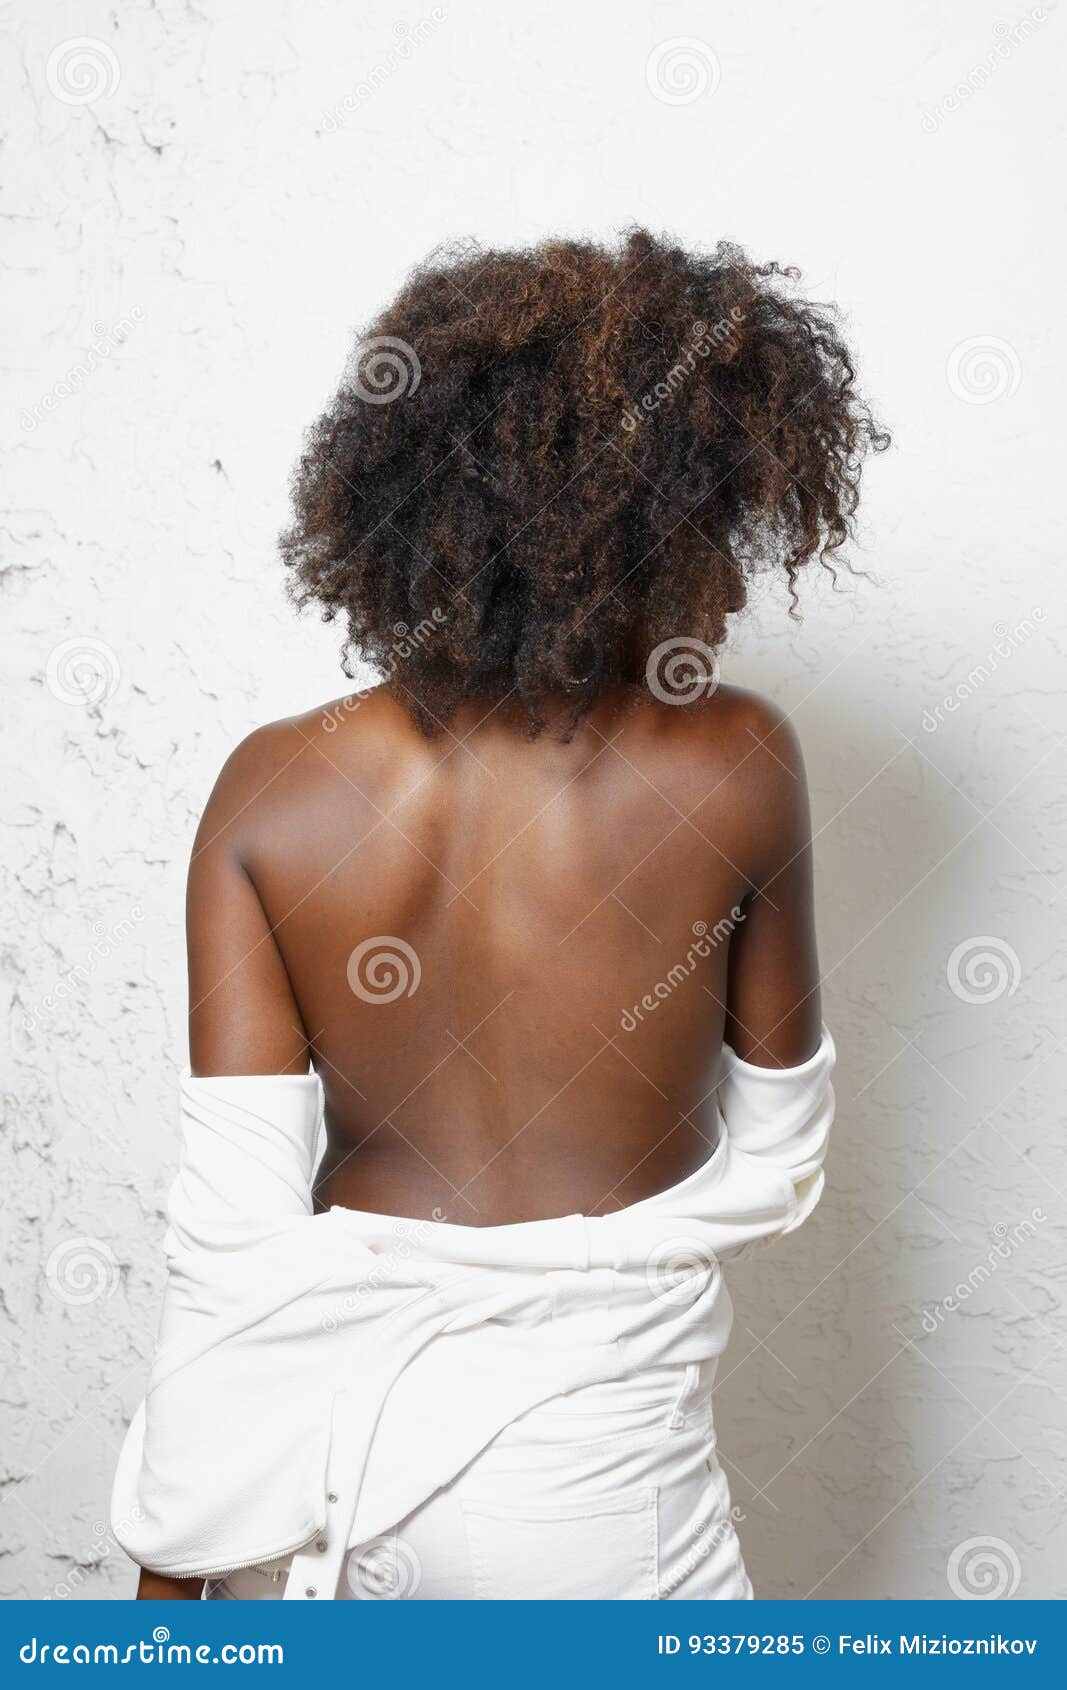 Black women undressing Woman Naked Undressing Stock Image Image Of African 93379285